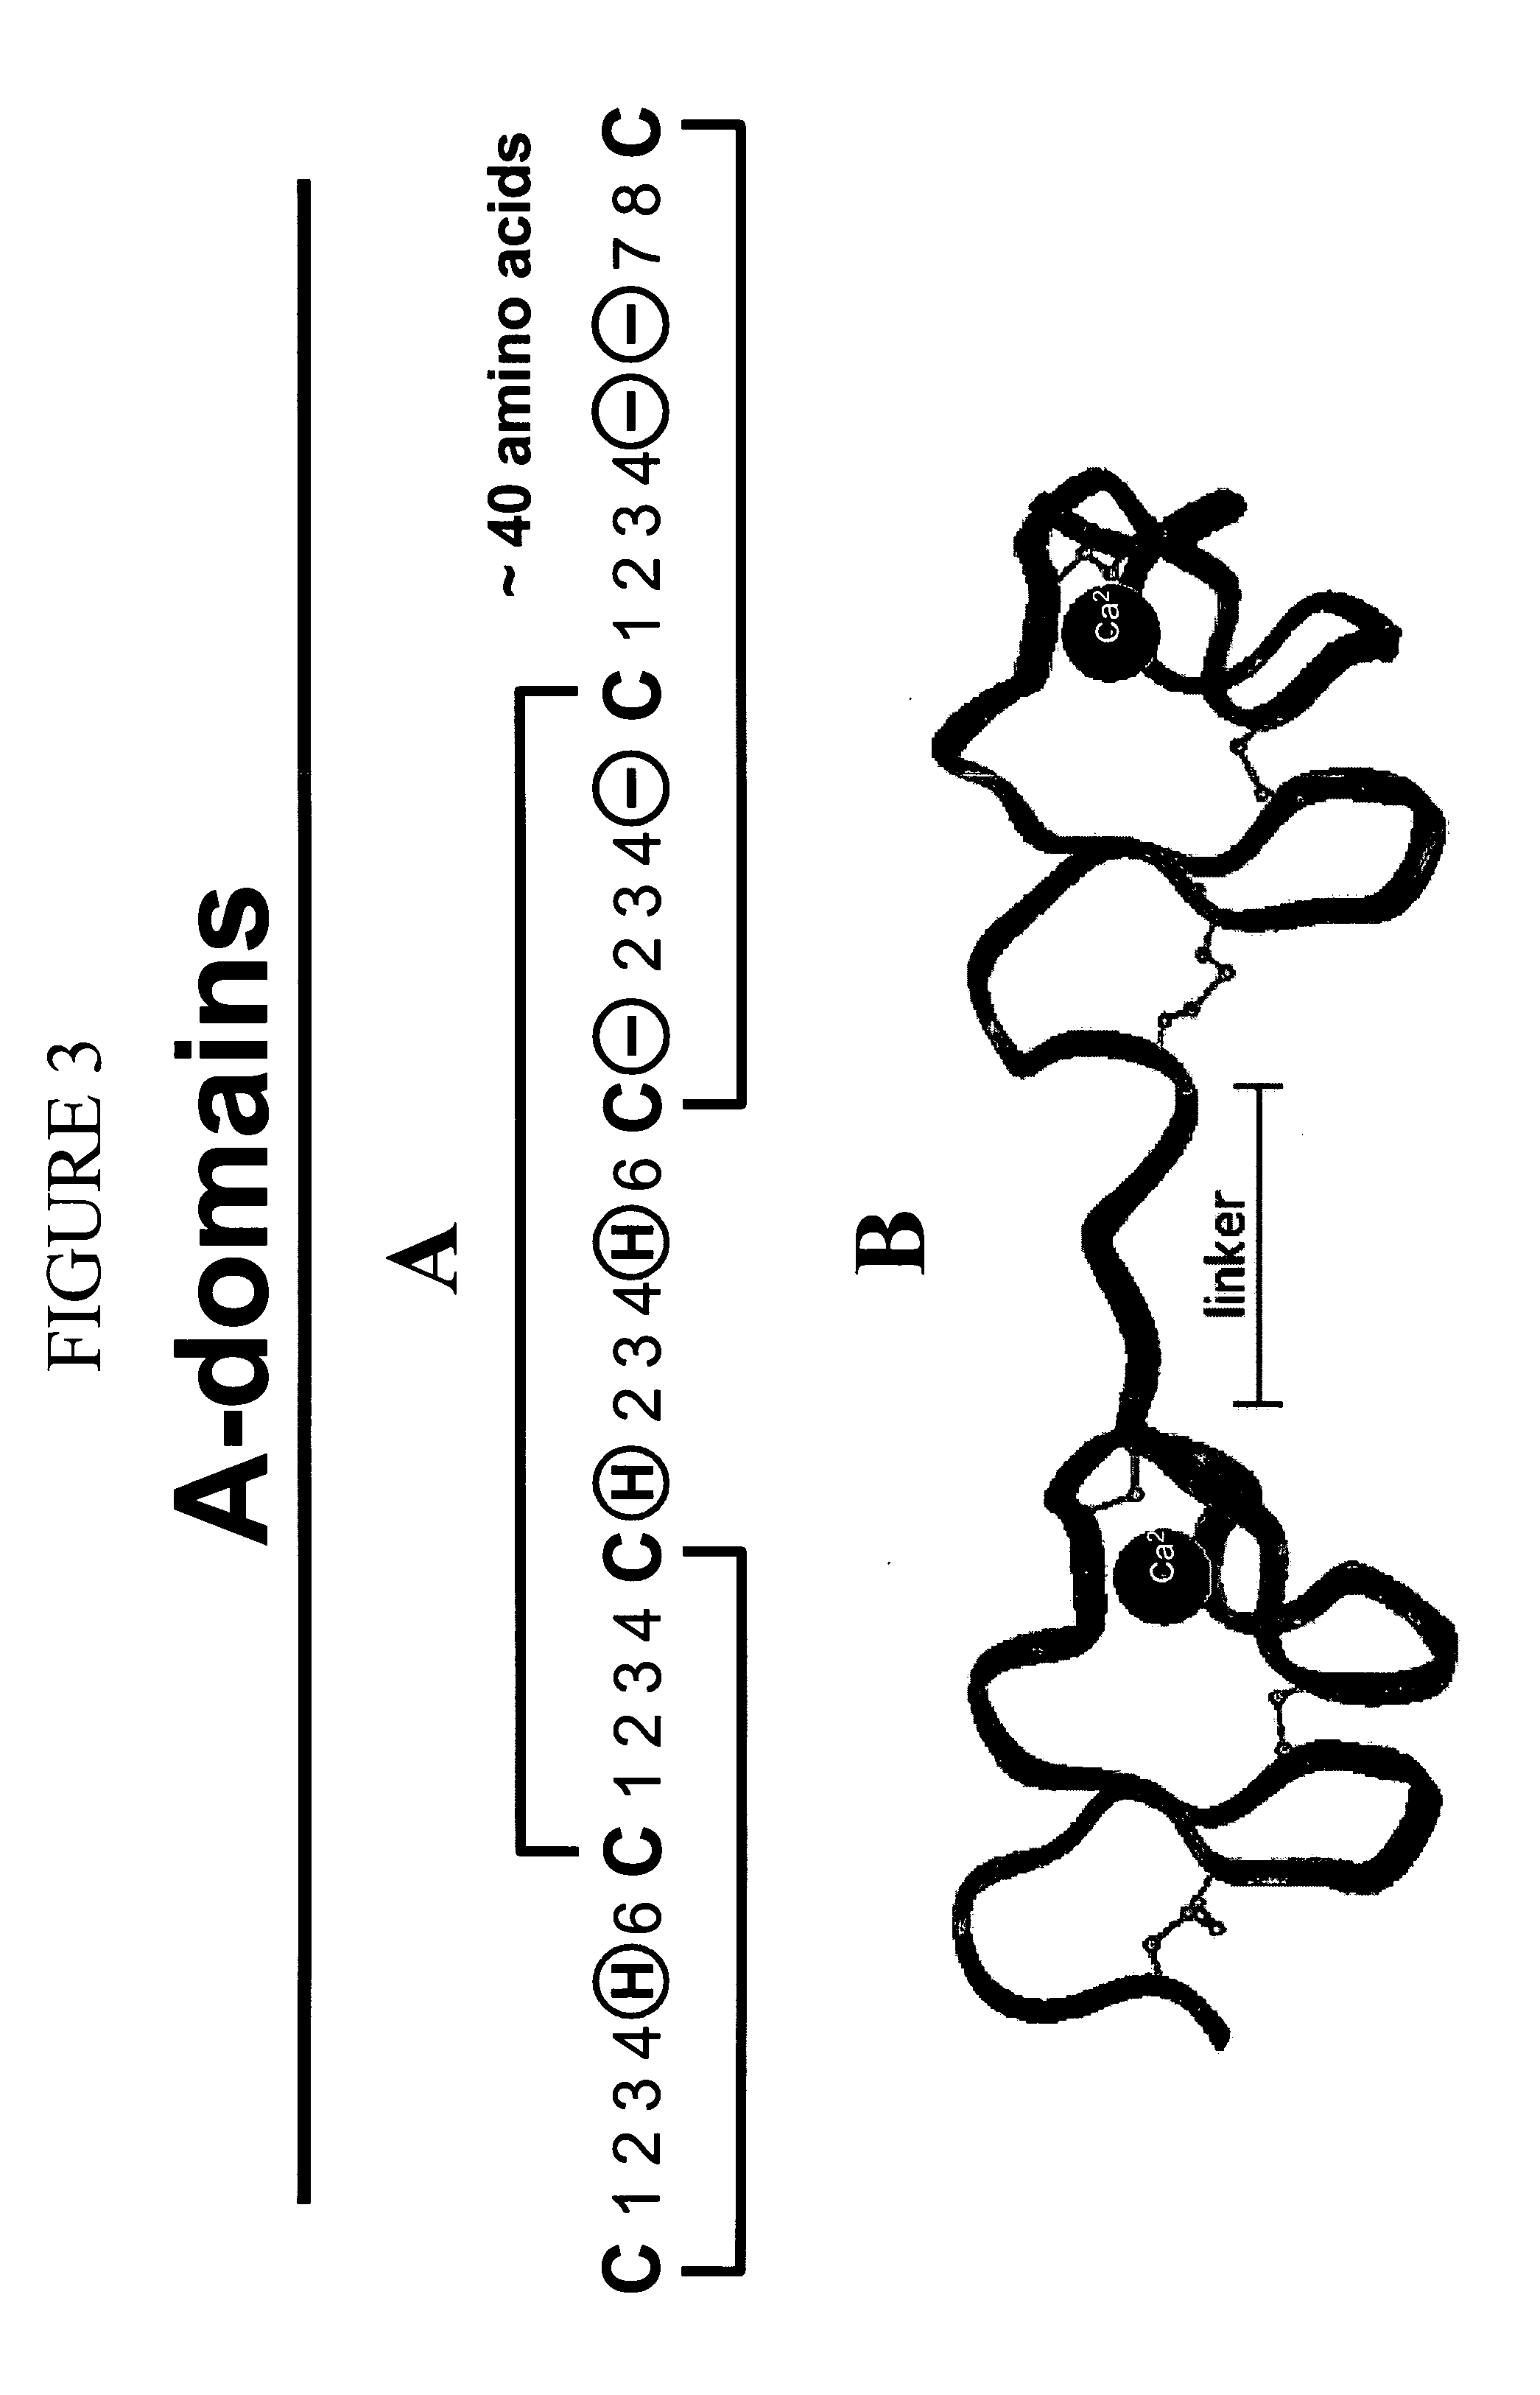 LDL receptor class A and EGF domain monomers and multimers